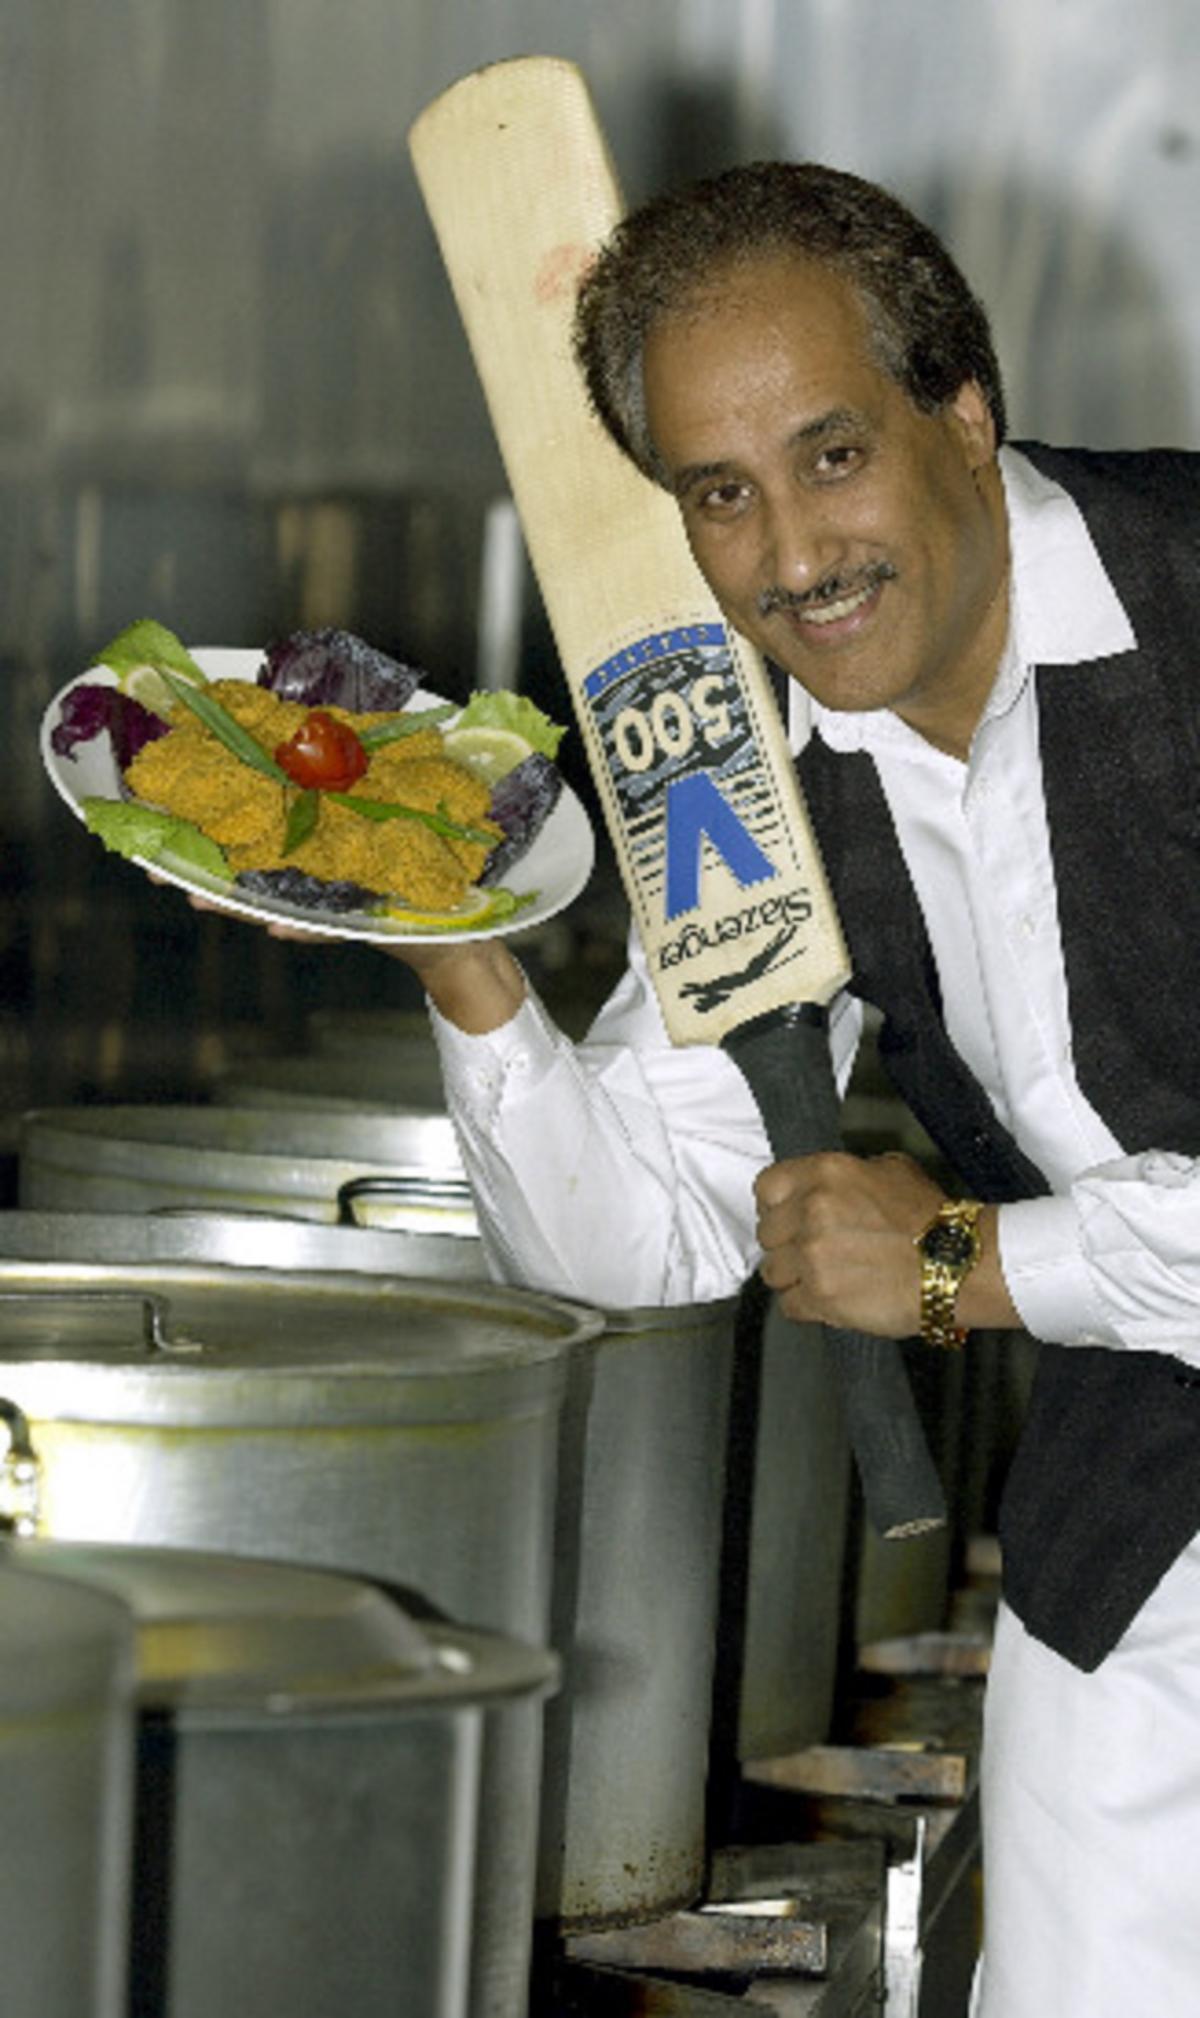 MANAGING DIRECTOR OF AAGRAH RESTAURANT MOHAMMED ASLAM WHO COOKED A BUFFET FOR GEOFF BOYCOTT AND THE INDIAN TEST TEAM